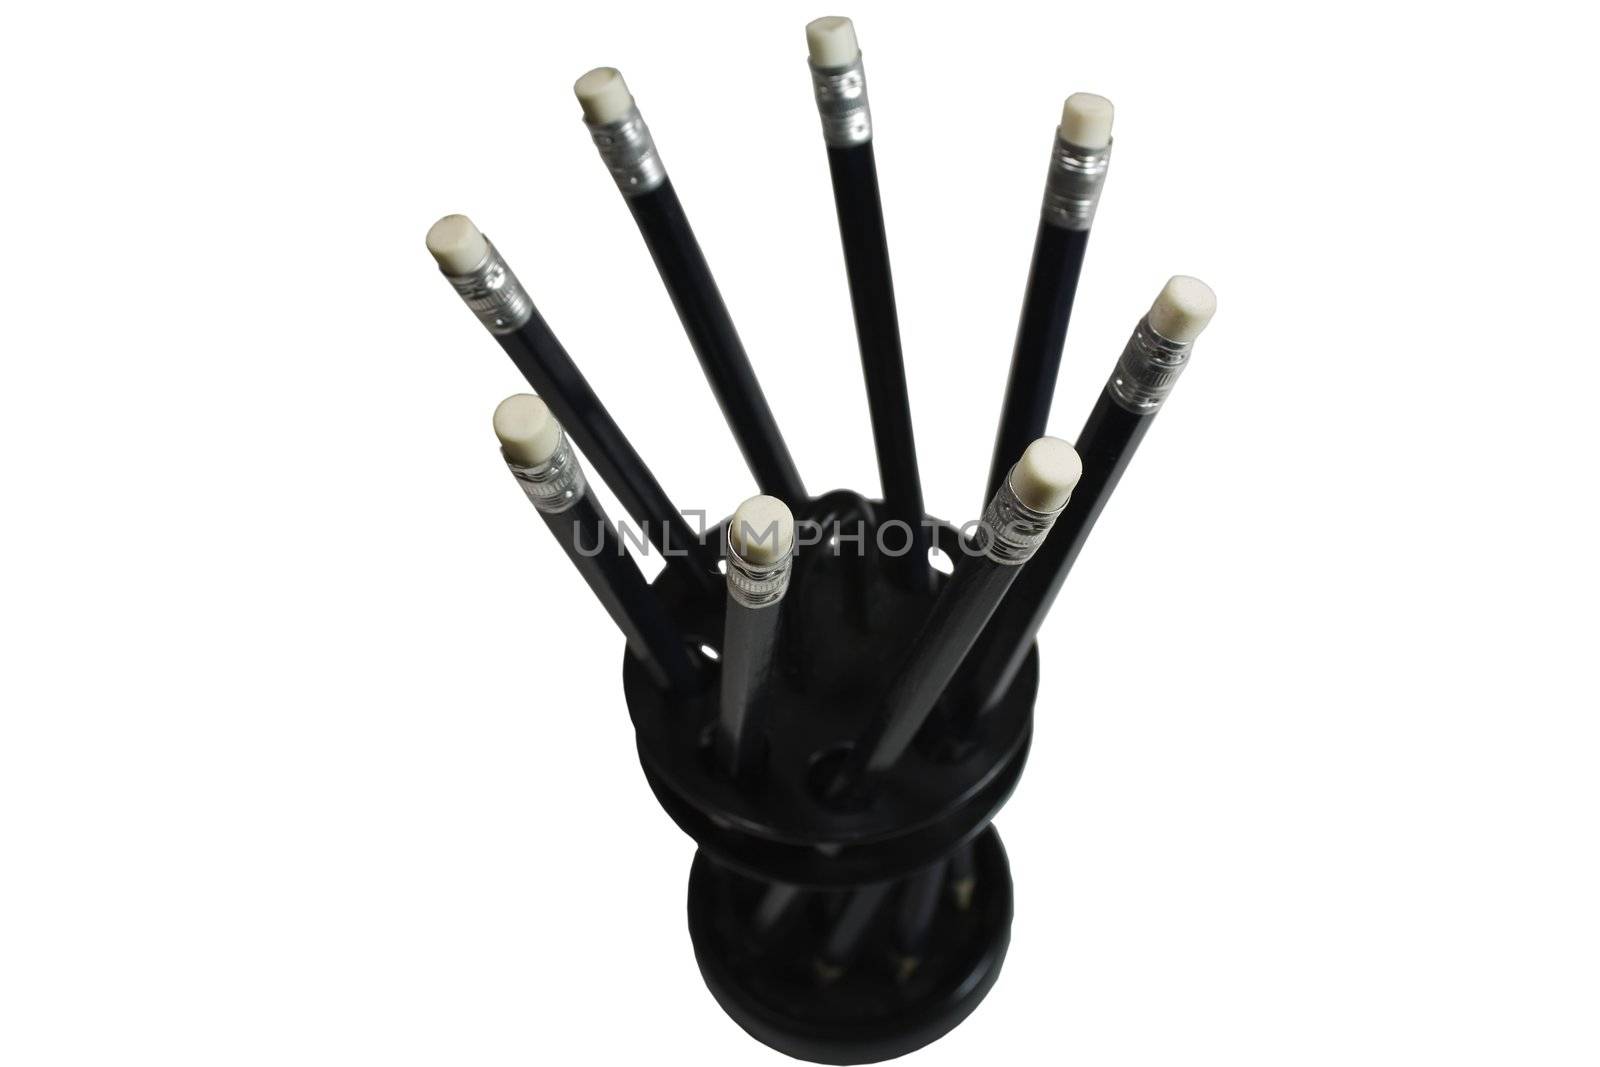 8 Black pencils with erasers in a black holder